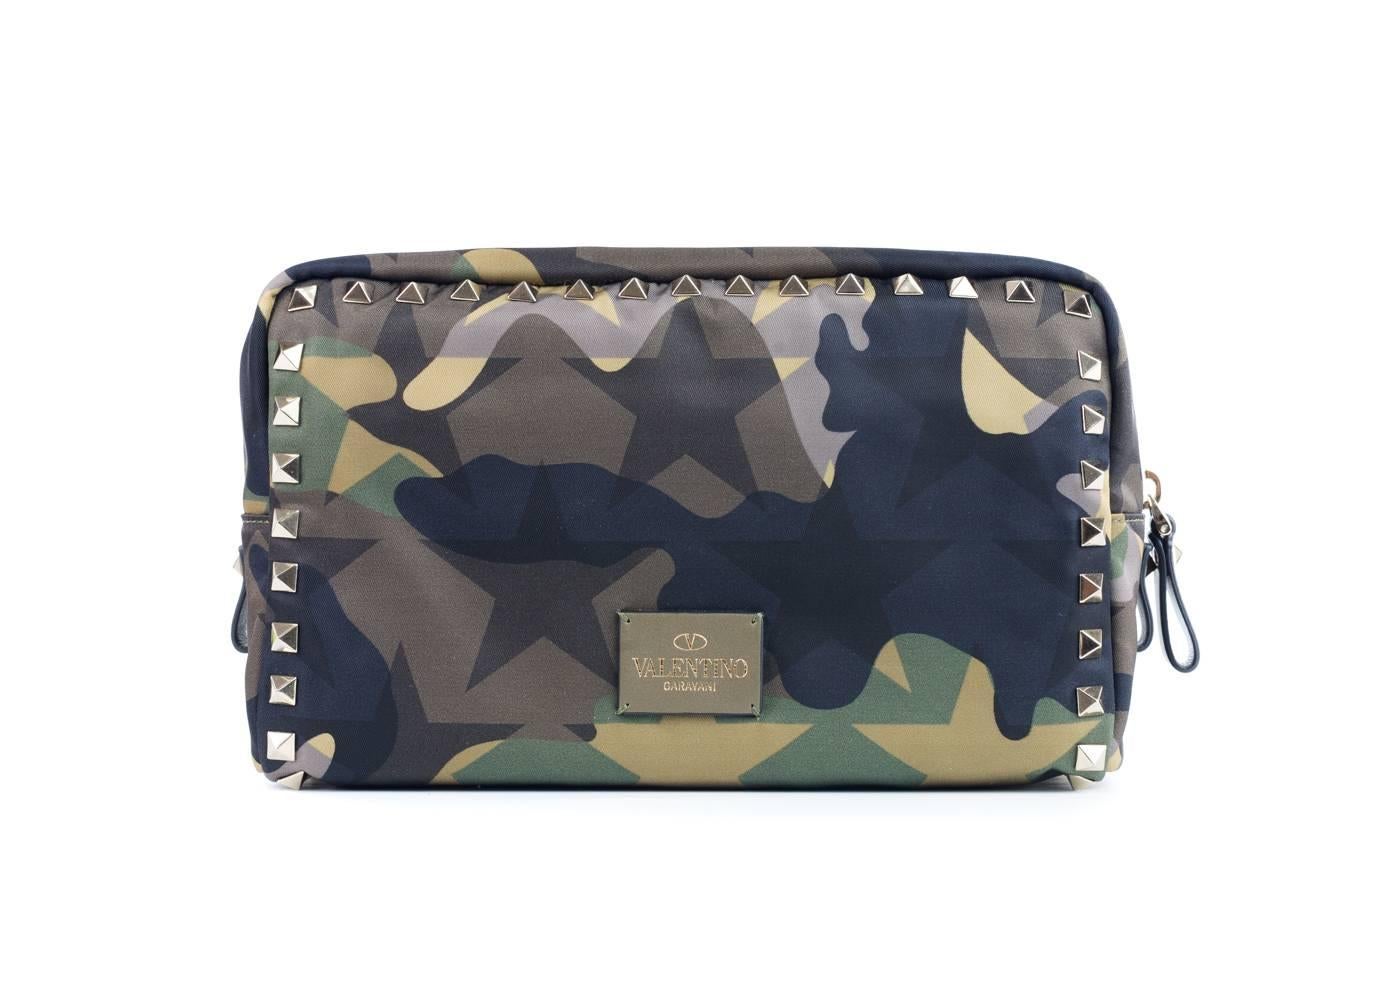 Brand New Valentino Women's Pouch
Original Tags & Dust Bag Included
Retails in Stores & Online for $620
Dimensions: 8.8